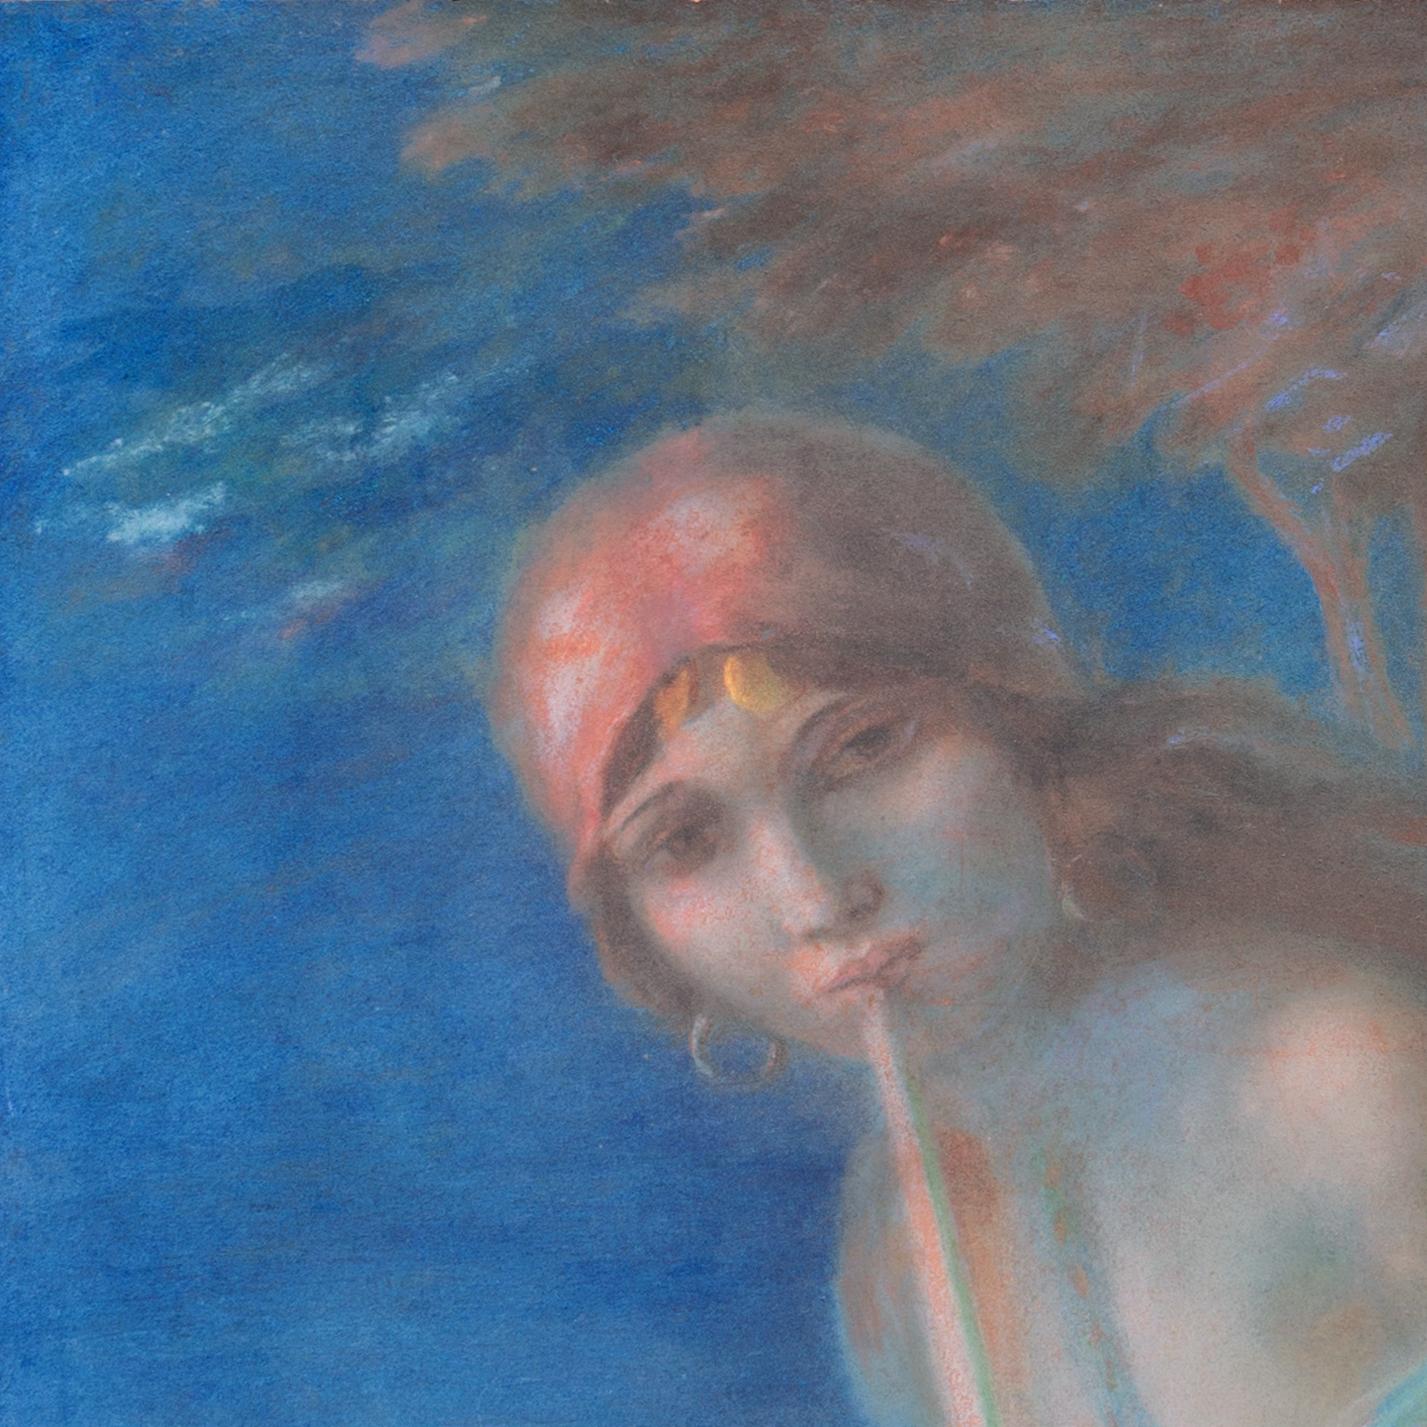 Signed lower left, 'A. C. Wiboltt' for Aage Christian (Jack) Wiboltt (Danish-American, 1894-1952) and created circa 1925.

A substantial, early twentieth-century, figural pastel showing a young woman wearing traditional gypsy costume and playing her